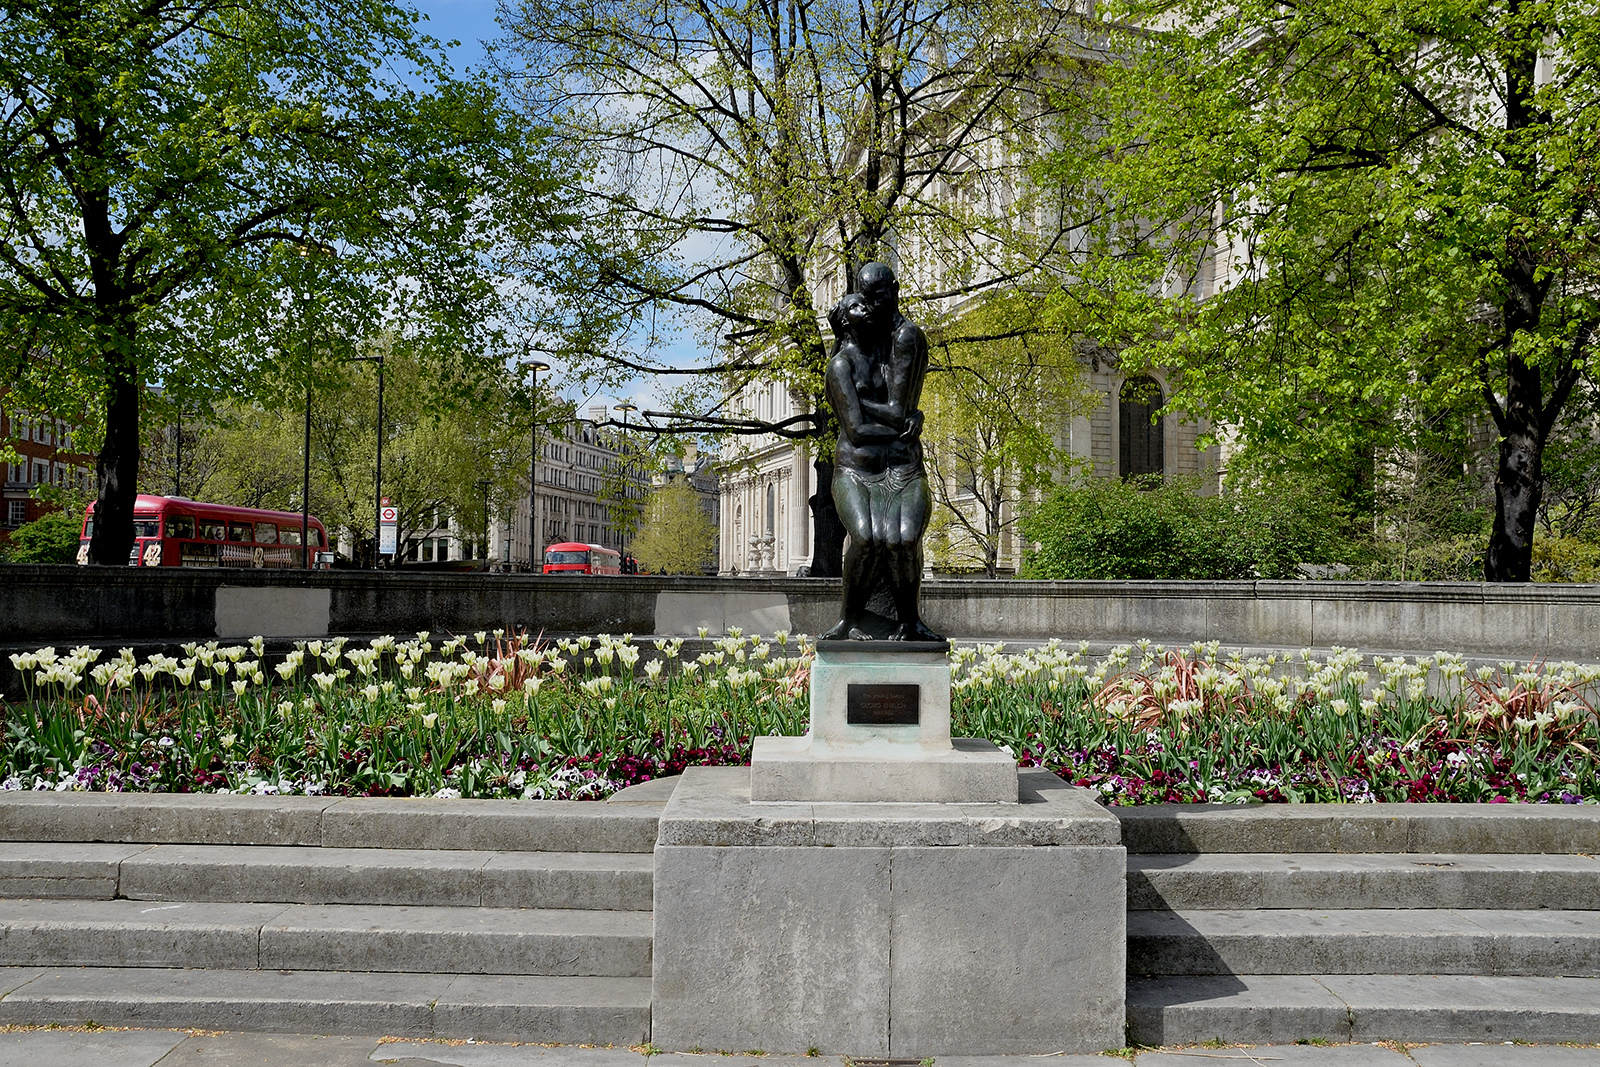 20170416_City-of-London_New-Change-Cannon-Street_Festival-gardens-with-statue-The-Lovers